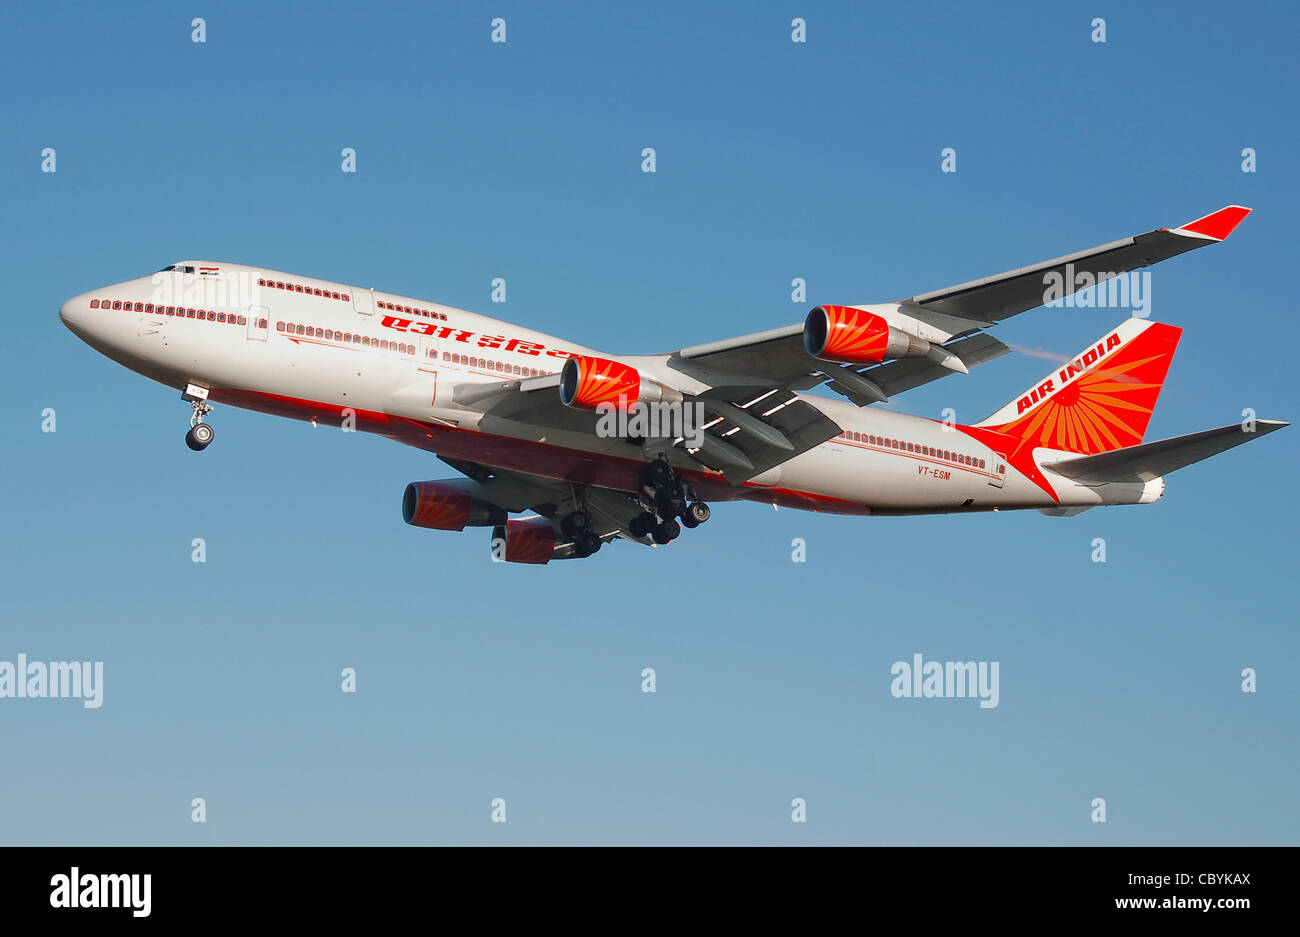 Air India Boeing 747-400 (VT-ESM) lands at London Heathrow Airport, England. Stock Photo